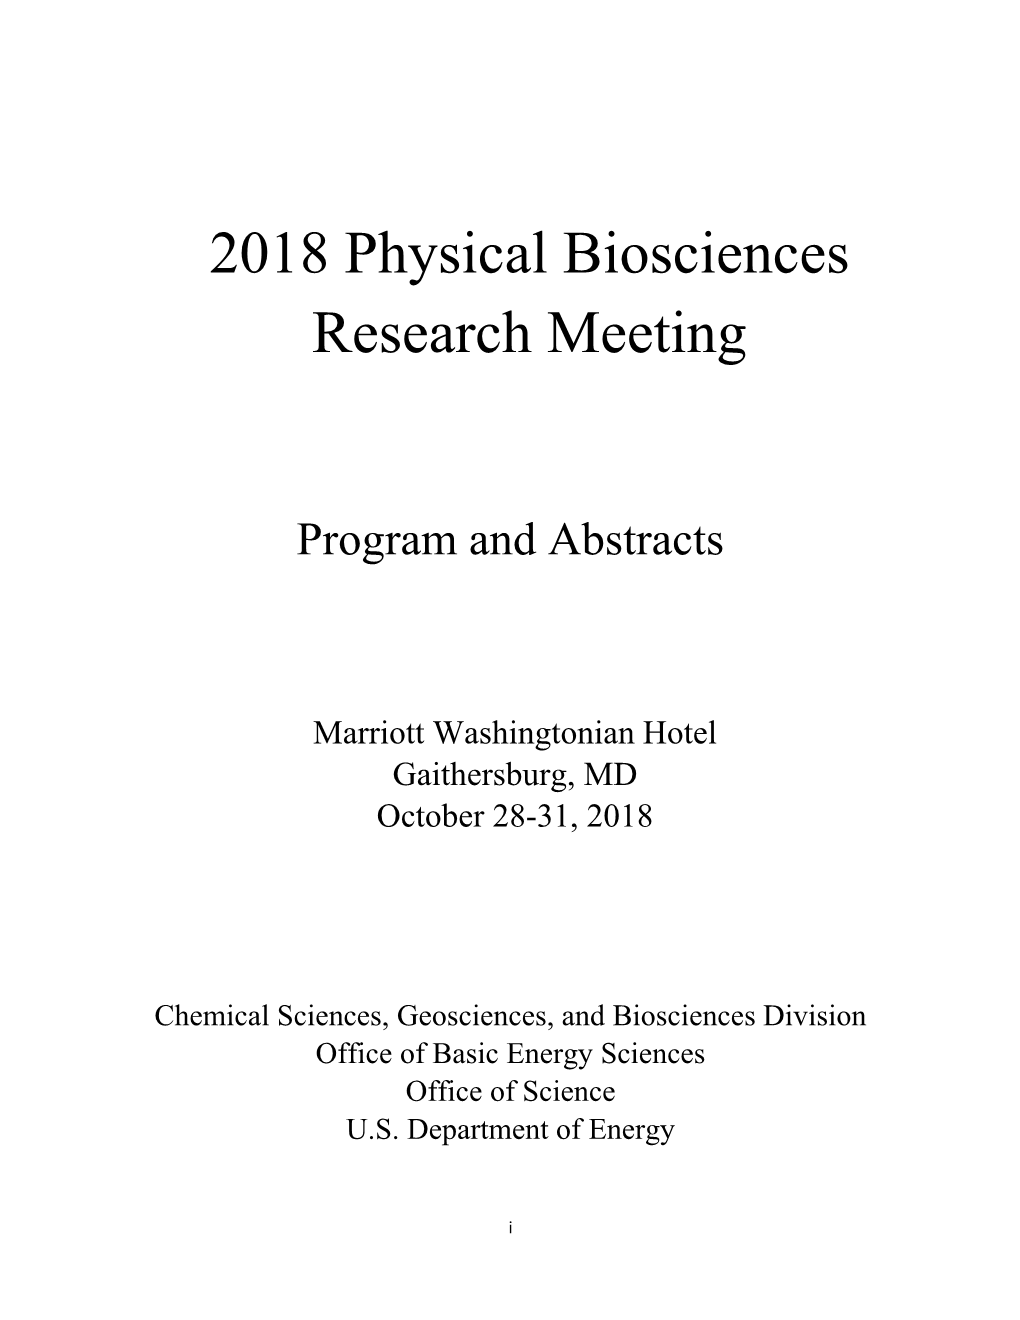 2018 Physical Biosciences Research Meeting